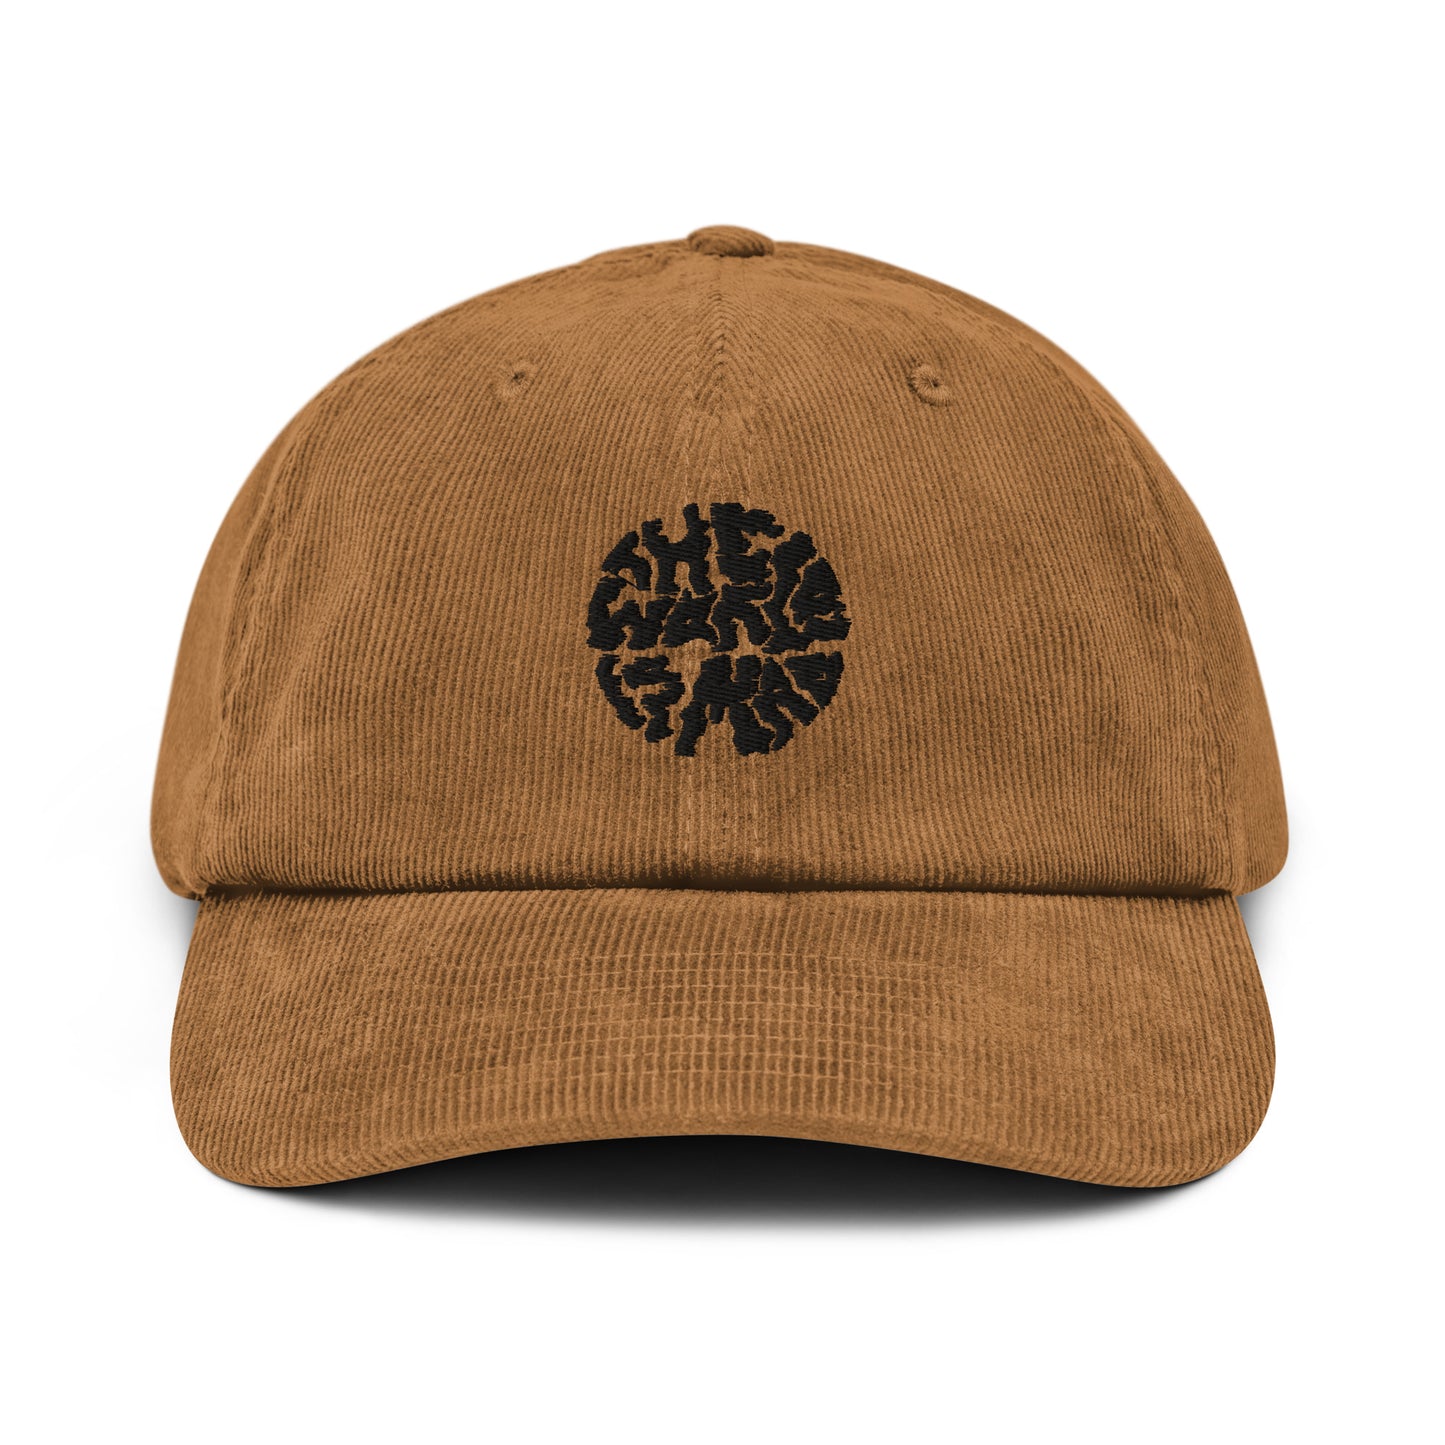 THE WORLD IS MAD Corduroy CAP By E*SURREALIST